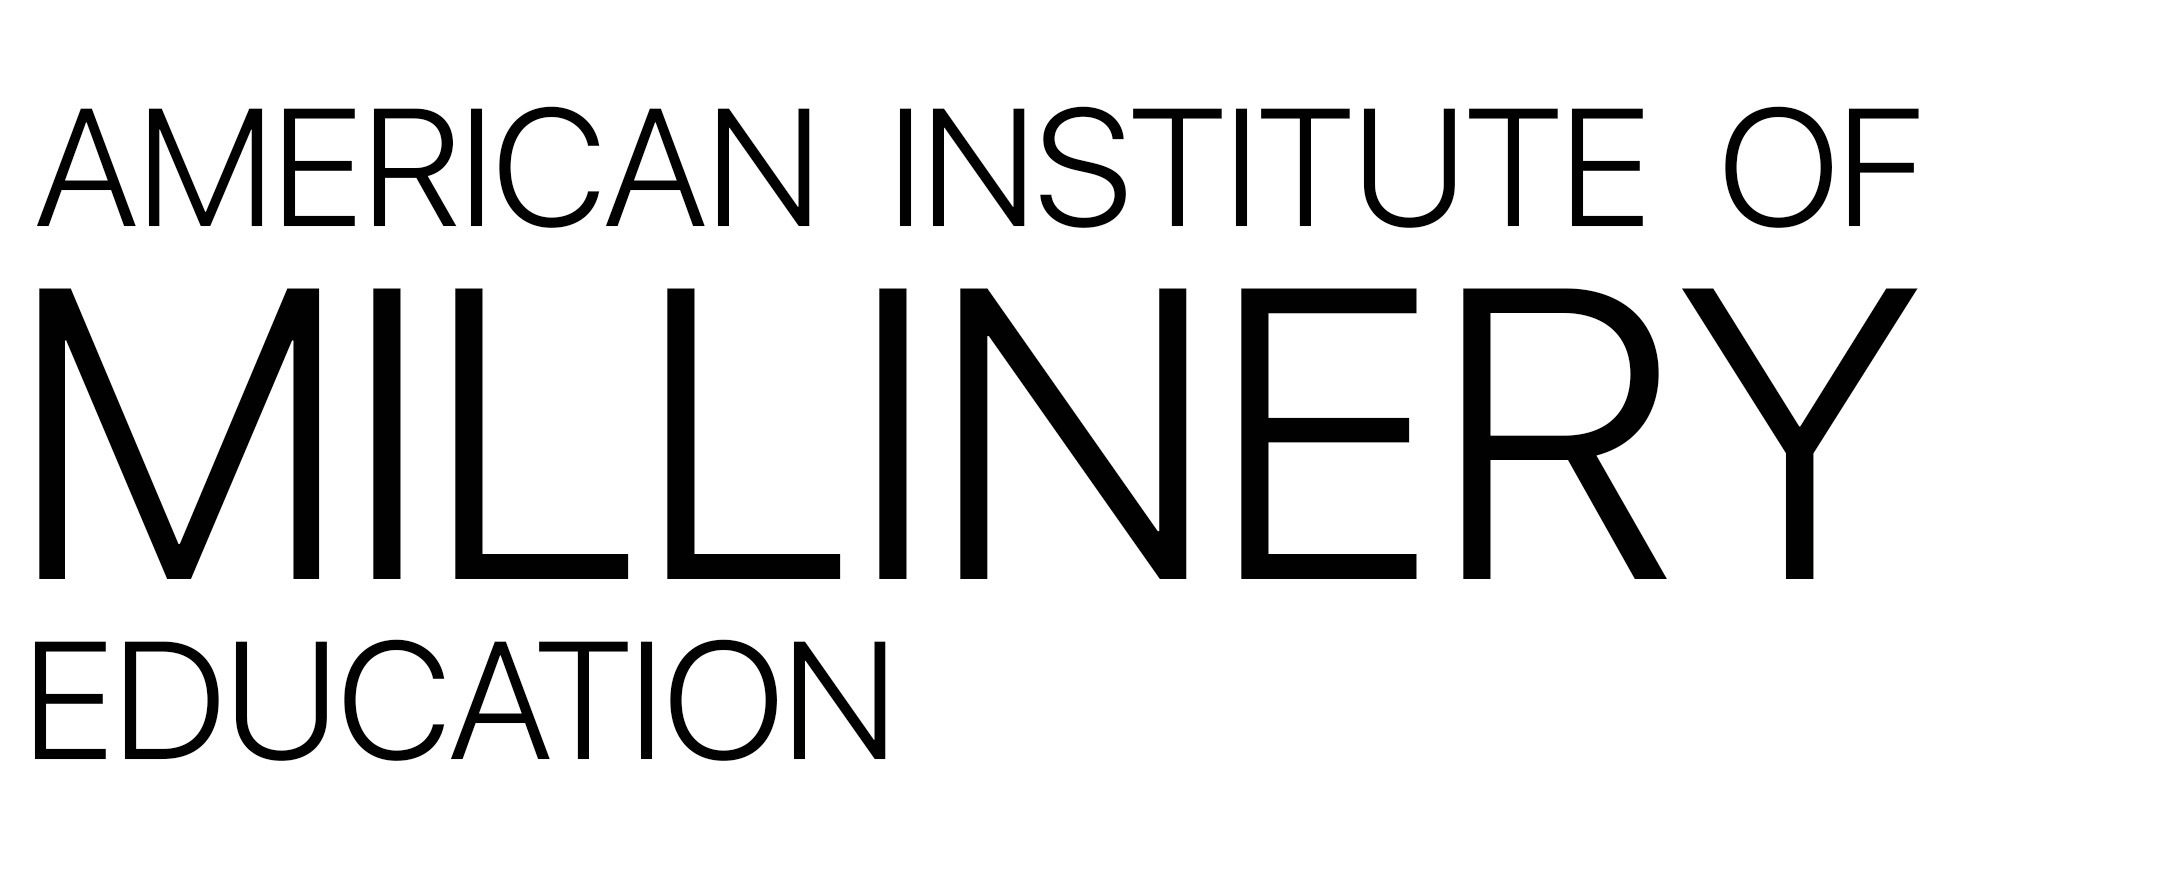 American Institute of Millinery Education